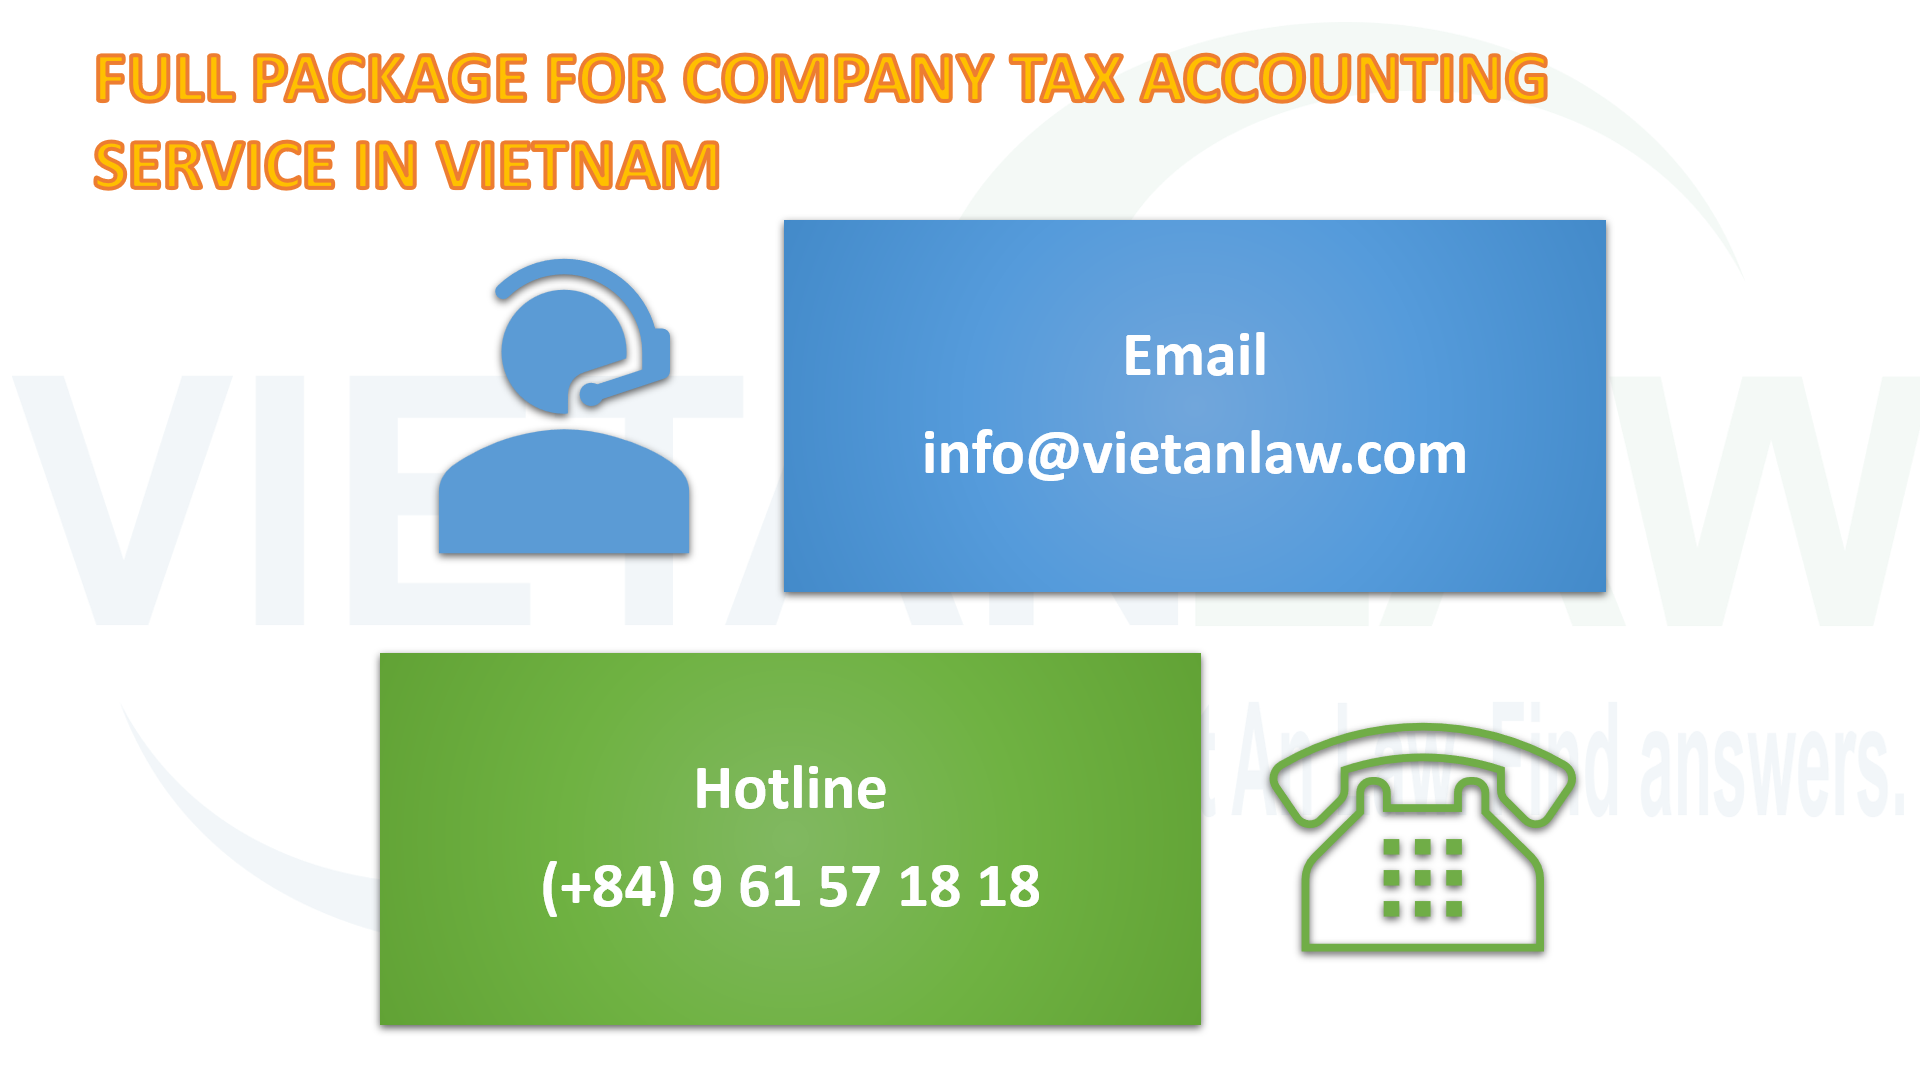 Package tax accounting service for company in Vietnam